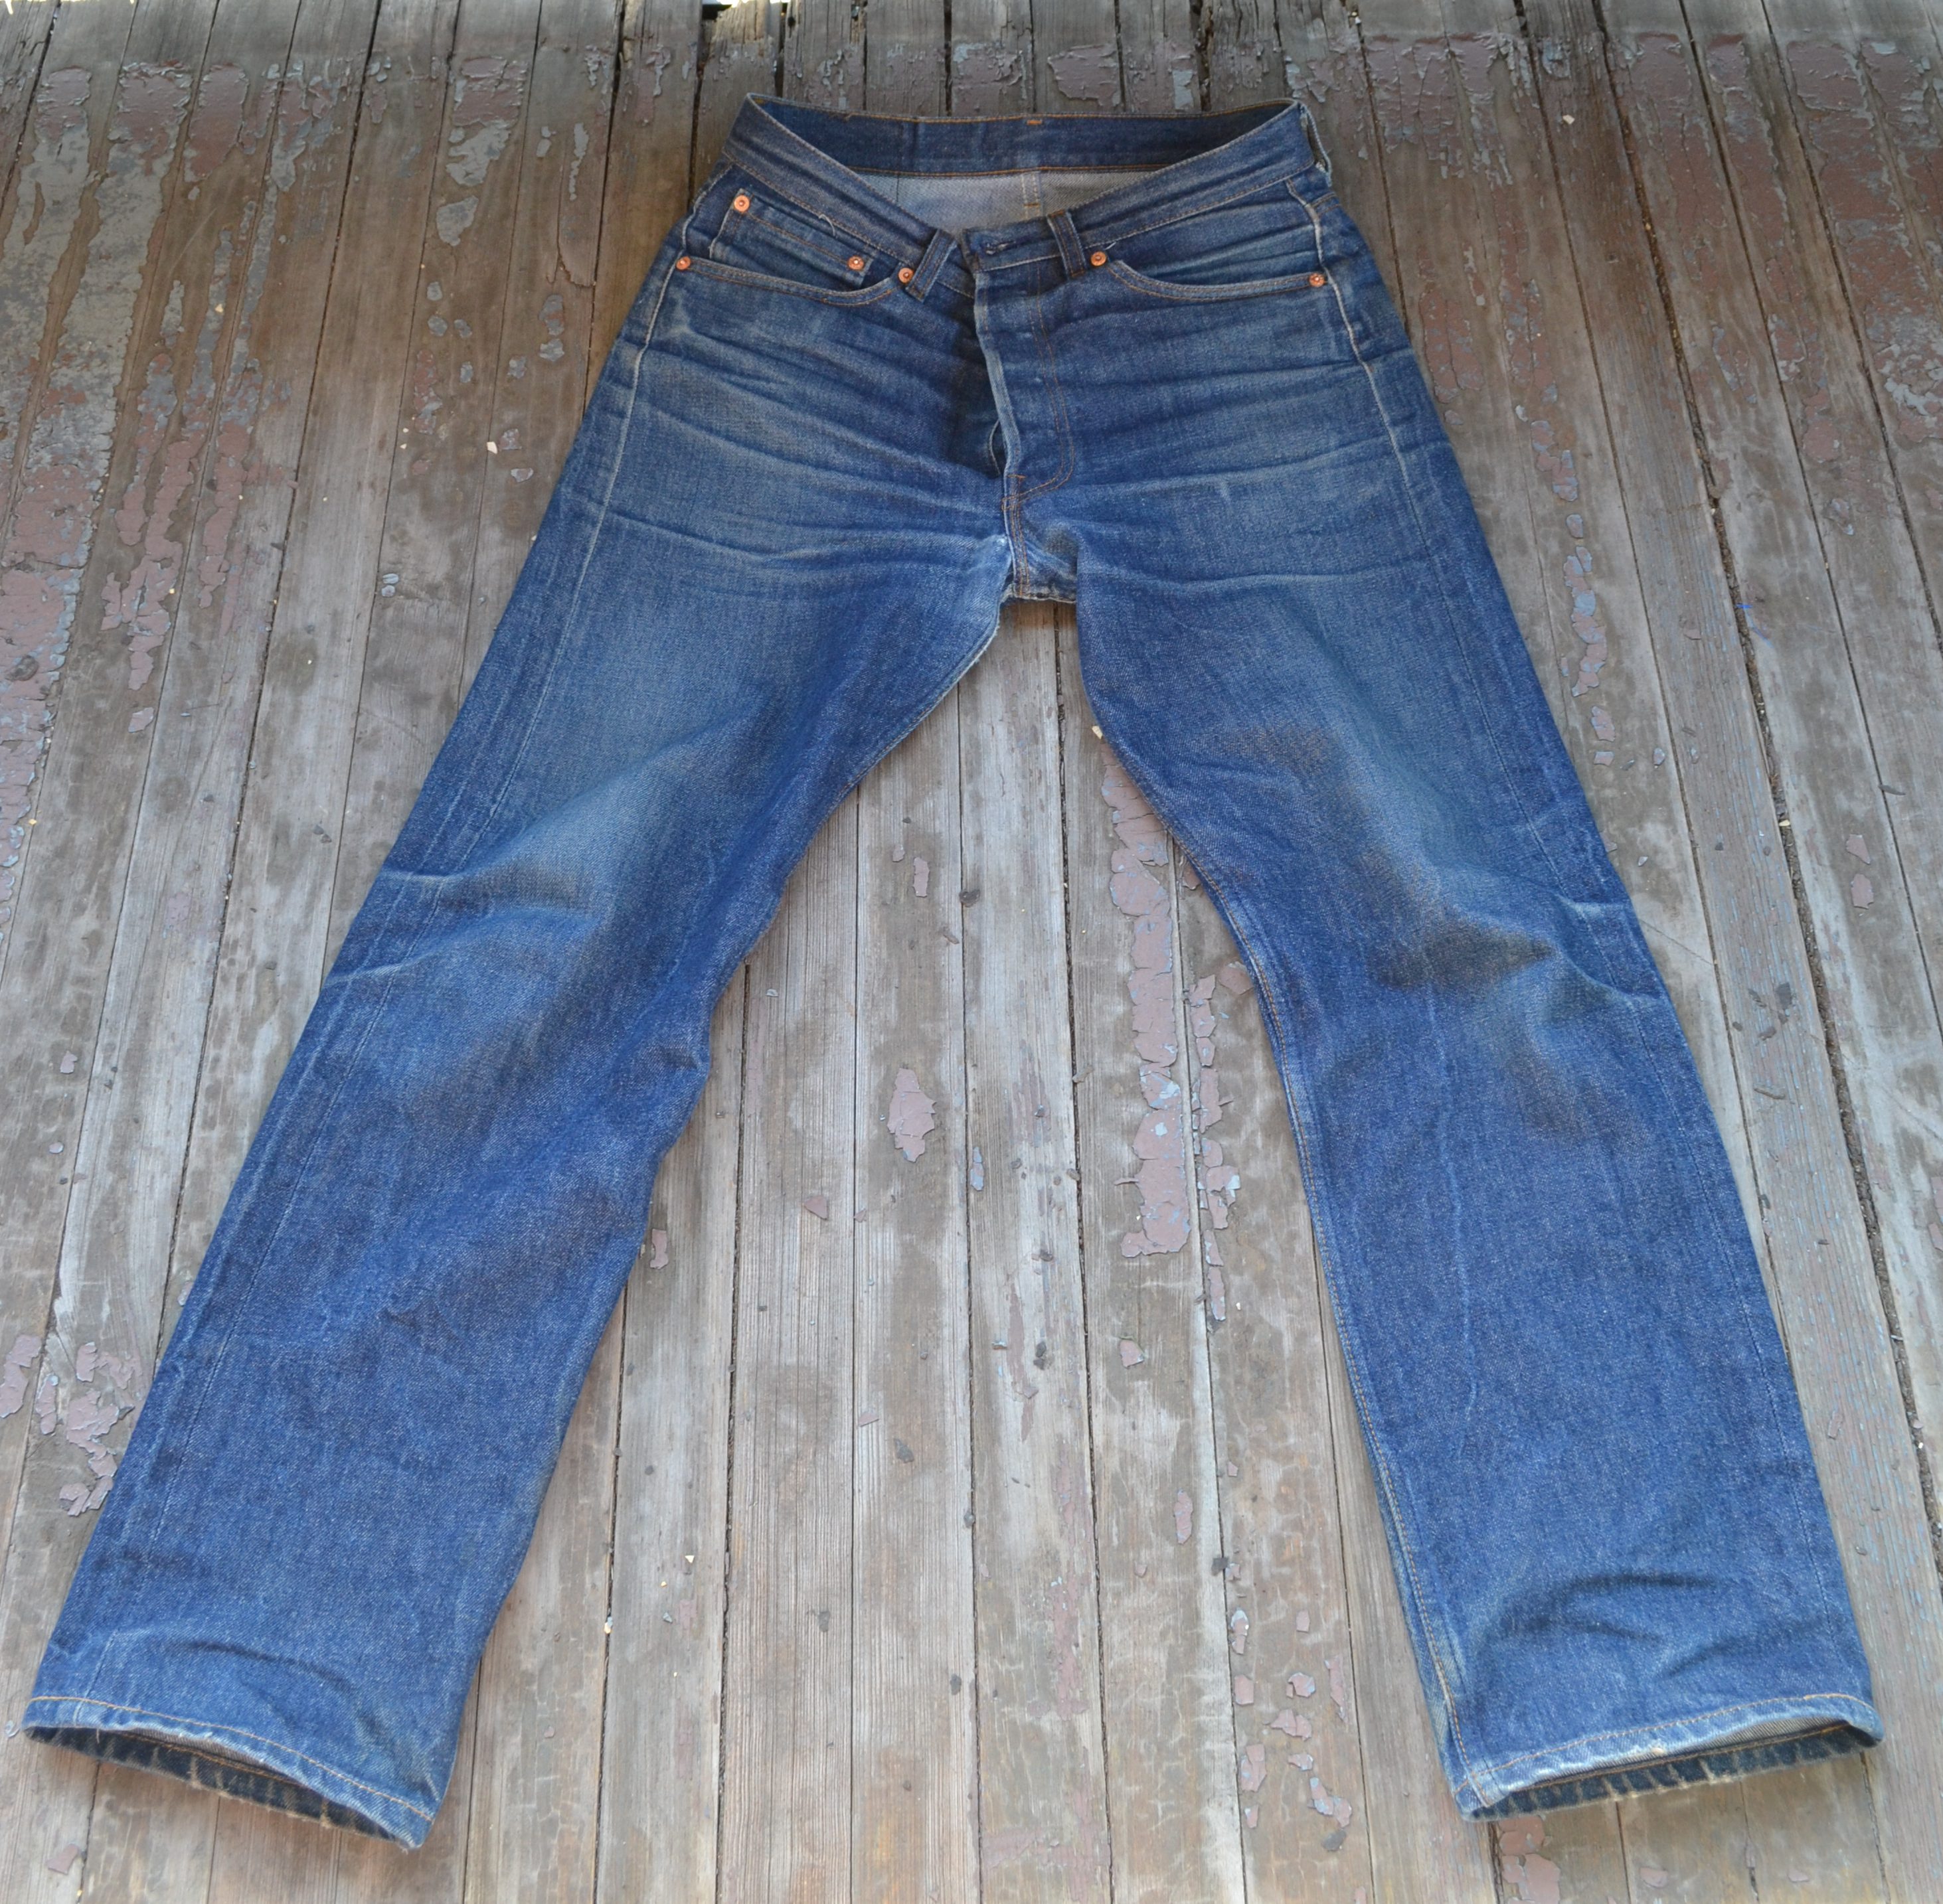 The History, Styling, and Legacy of the Levi’s 501. | Comma Vintage: Blog